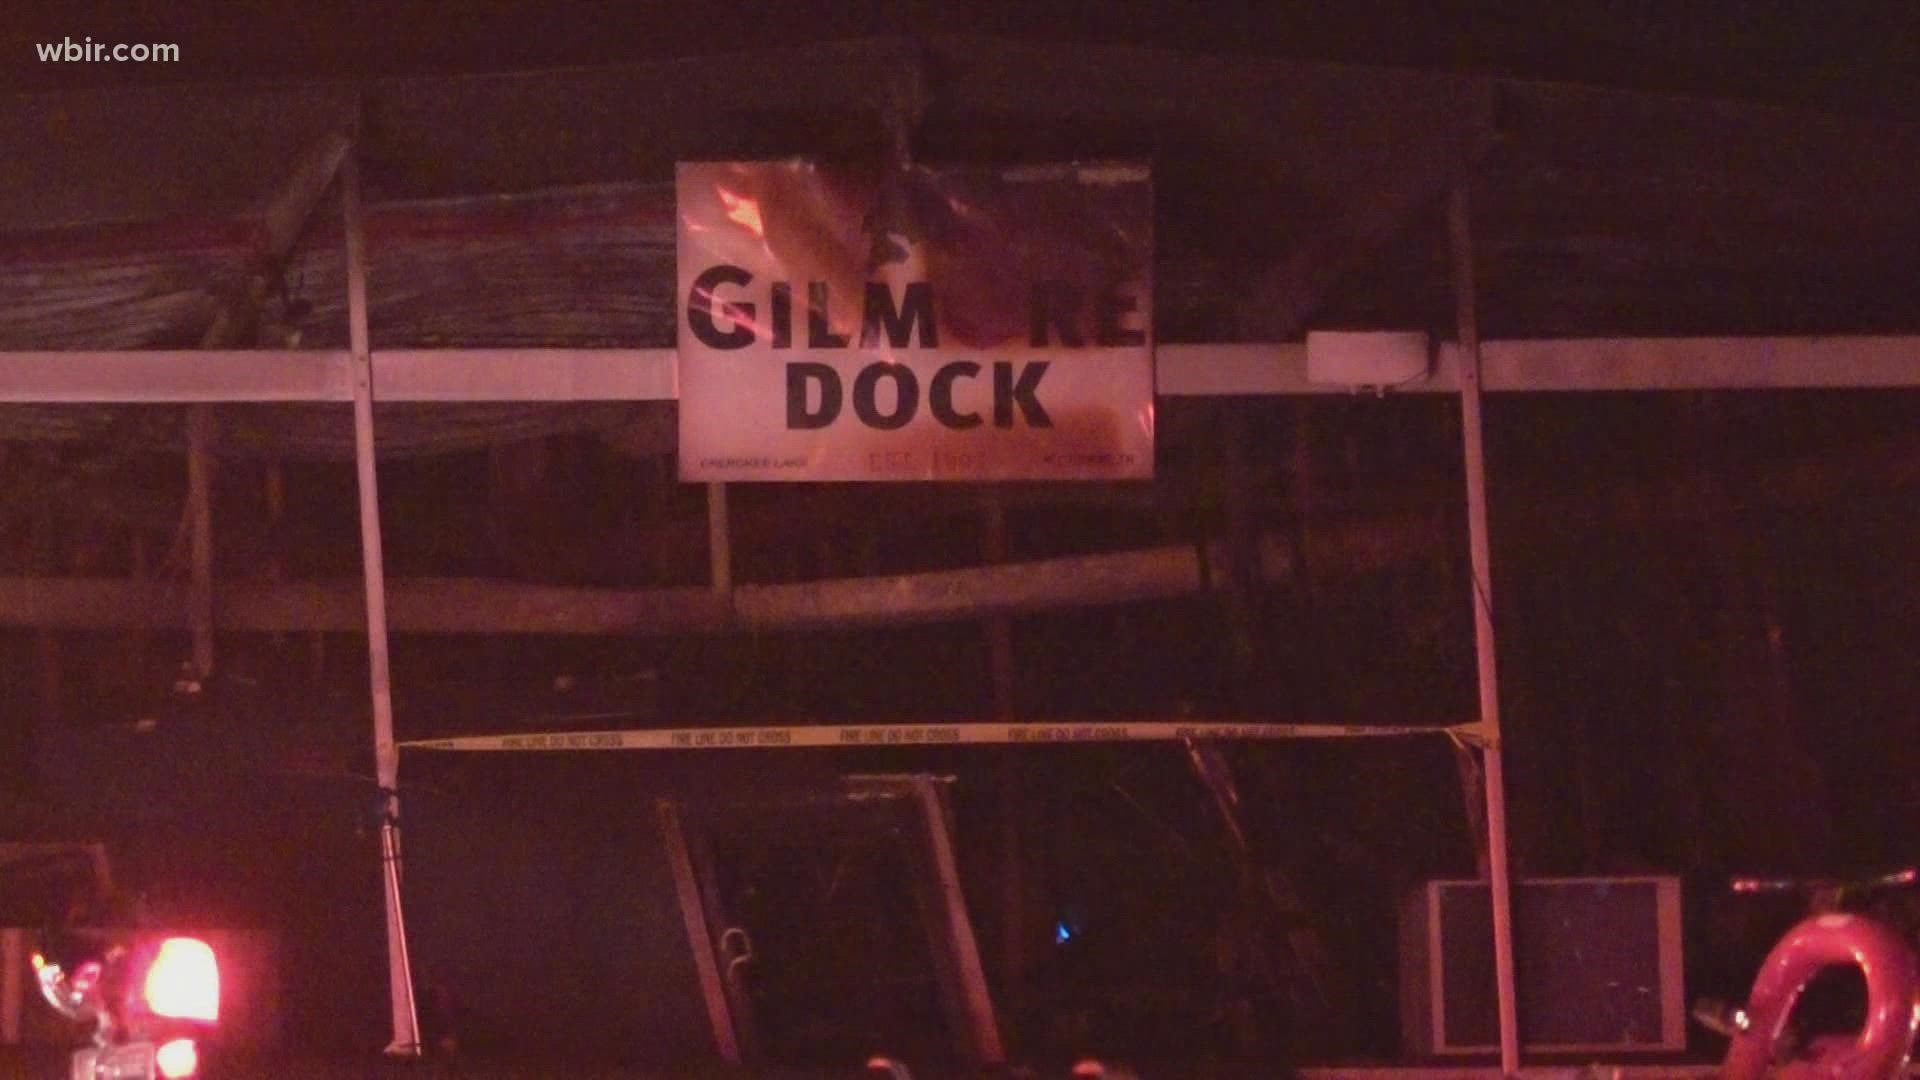 The fire broke out near the Gilmore Dock Tuesday evening at around 7 p.m., according to witnesses and dispatchers.